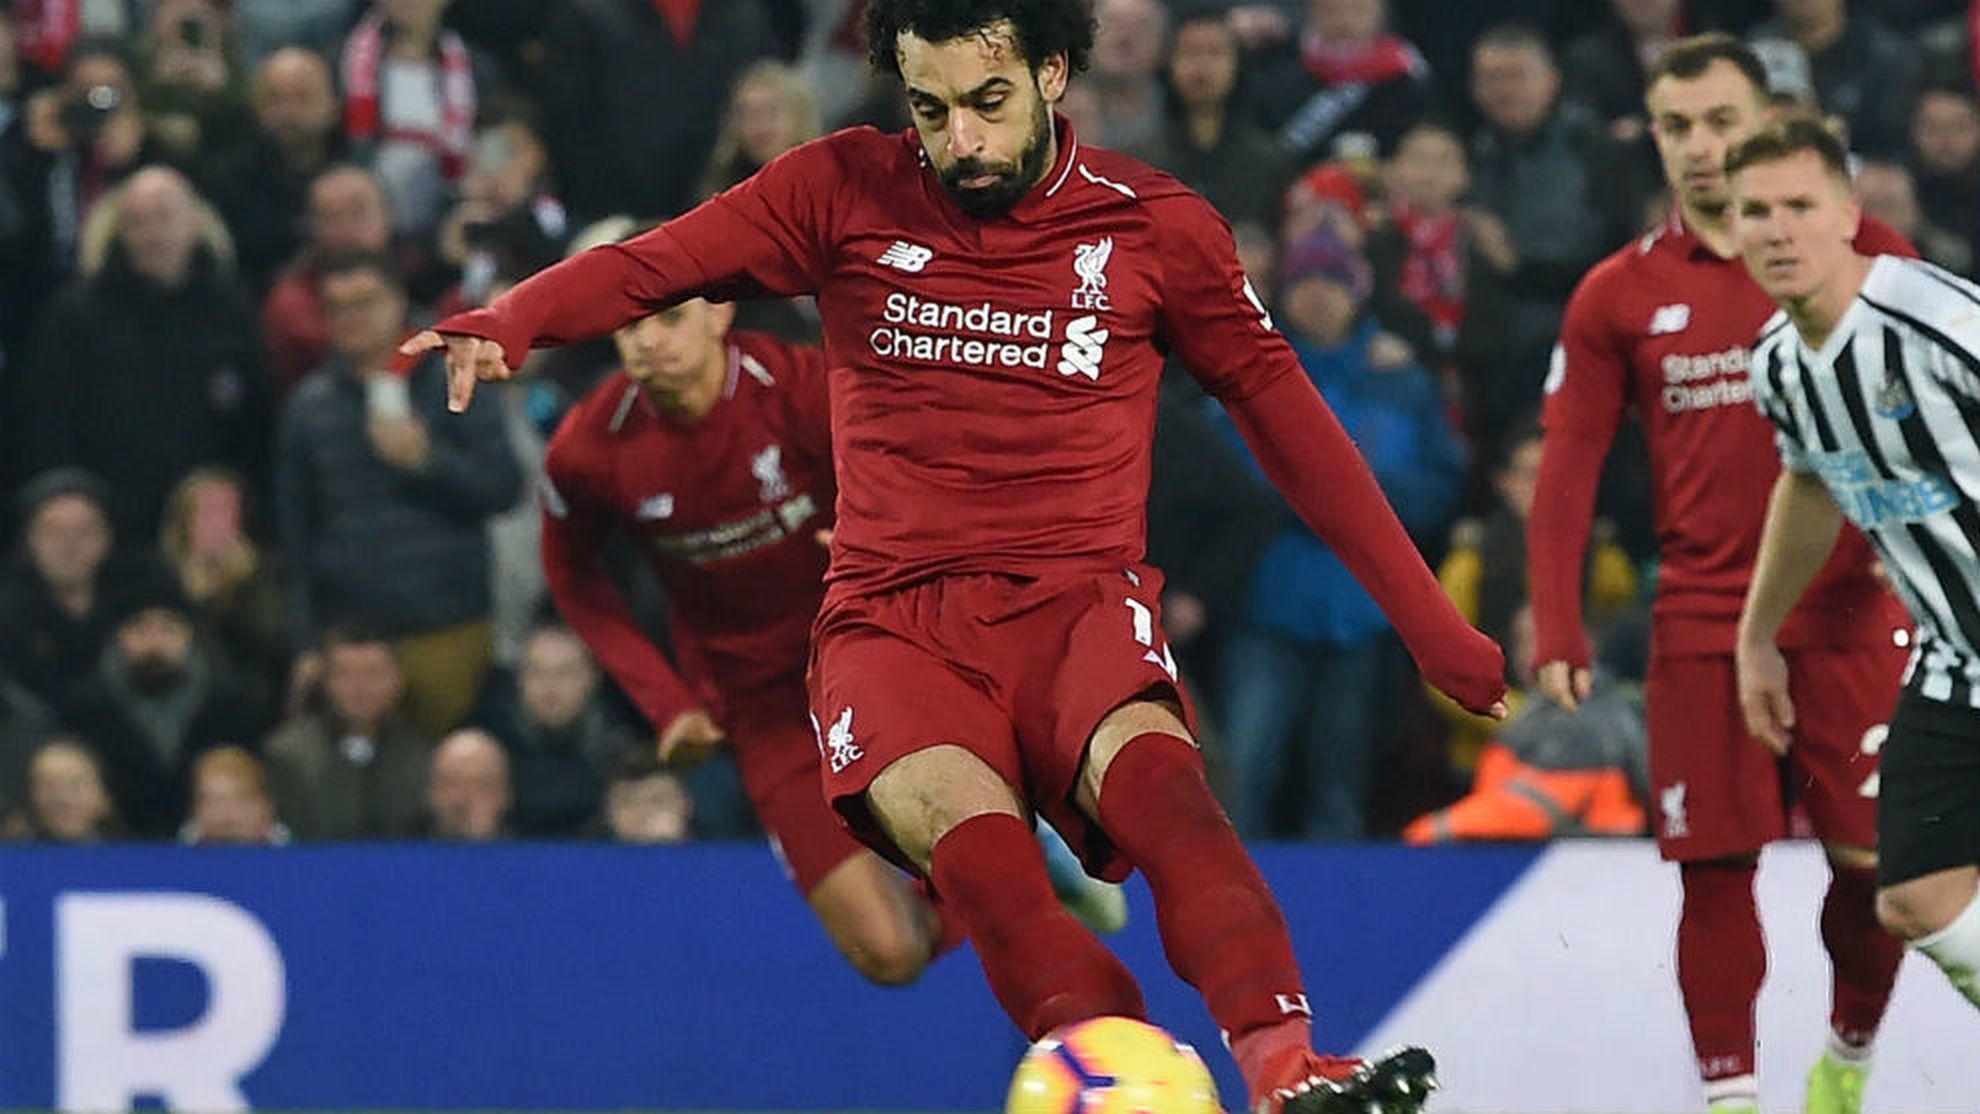 Mohamed Salah in a match against Newcastle